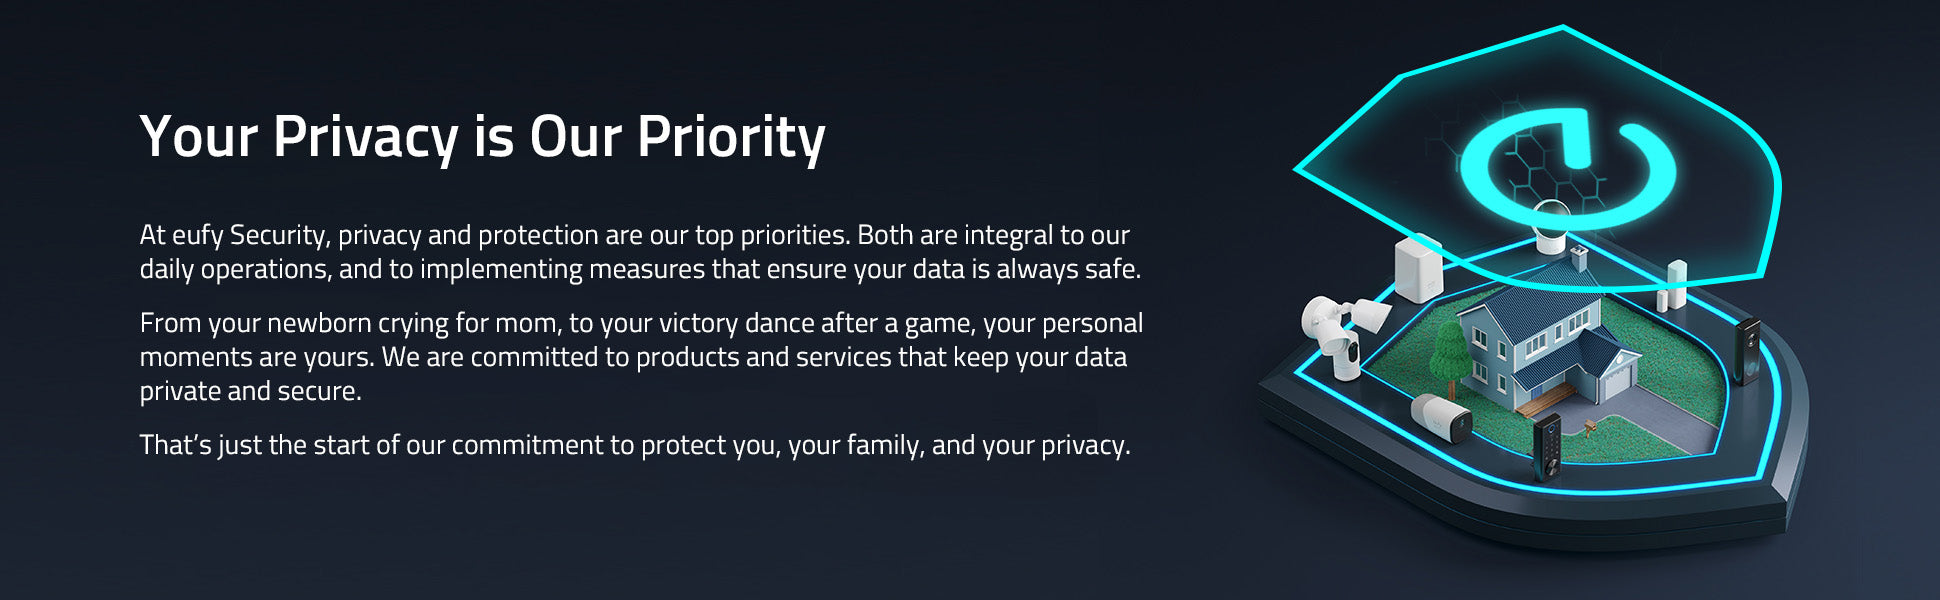 Your_Privacy_is_Our_Priority_2